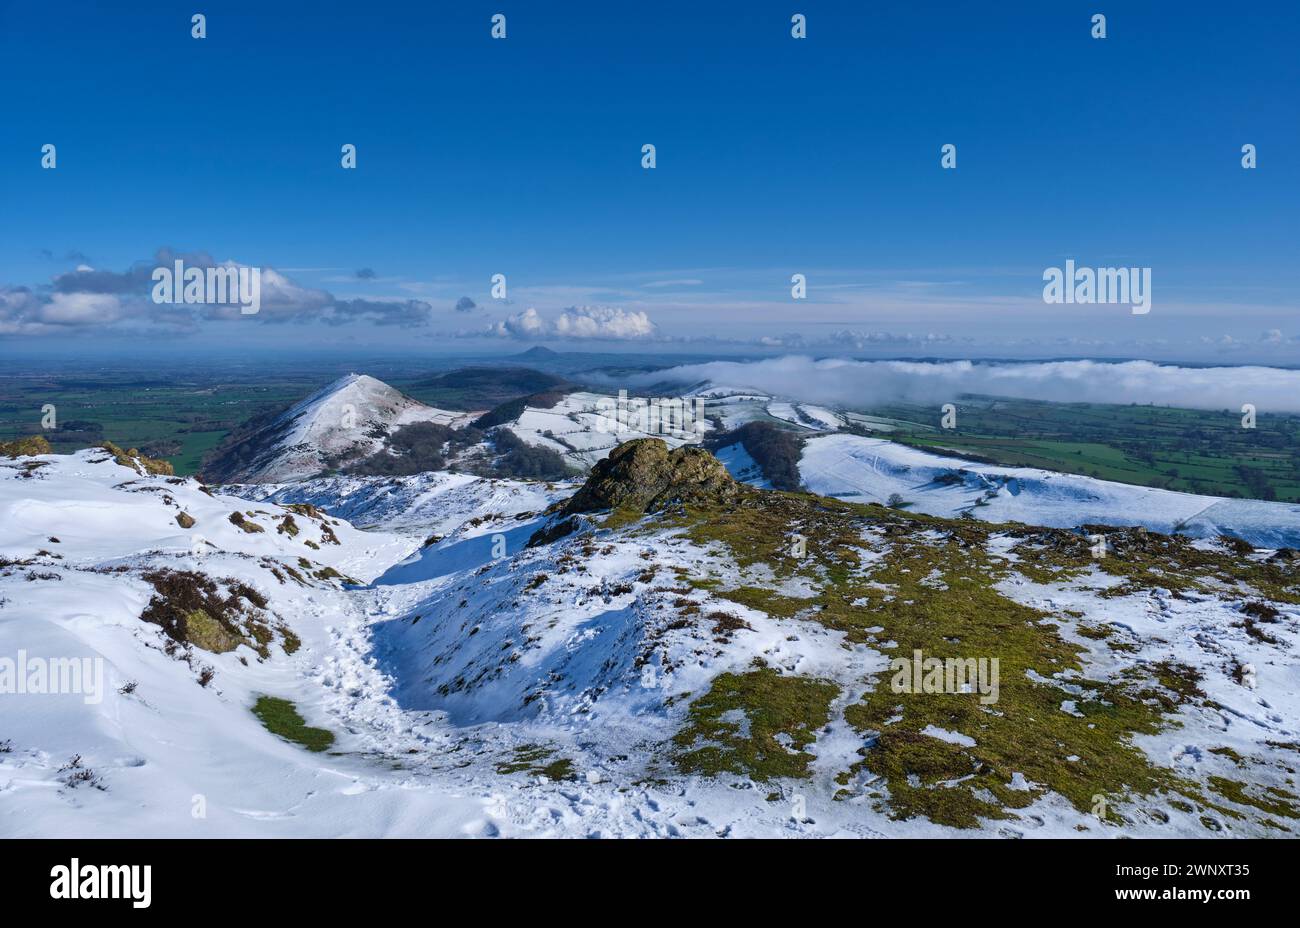 Snow on The Lawley, Hoar Edge, and Yell Bank, seen from a snowy Caer Caradoc, Church Stretton, Shropshire Stock Photo